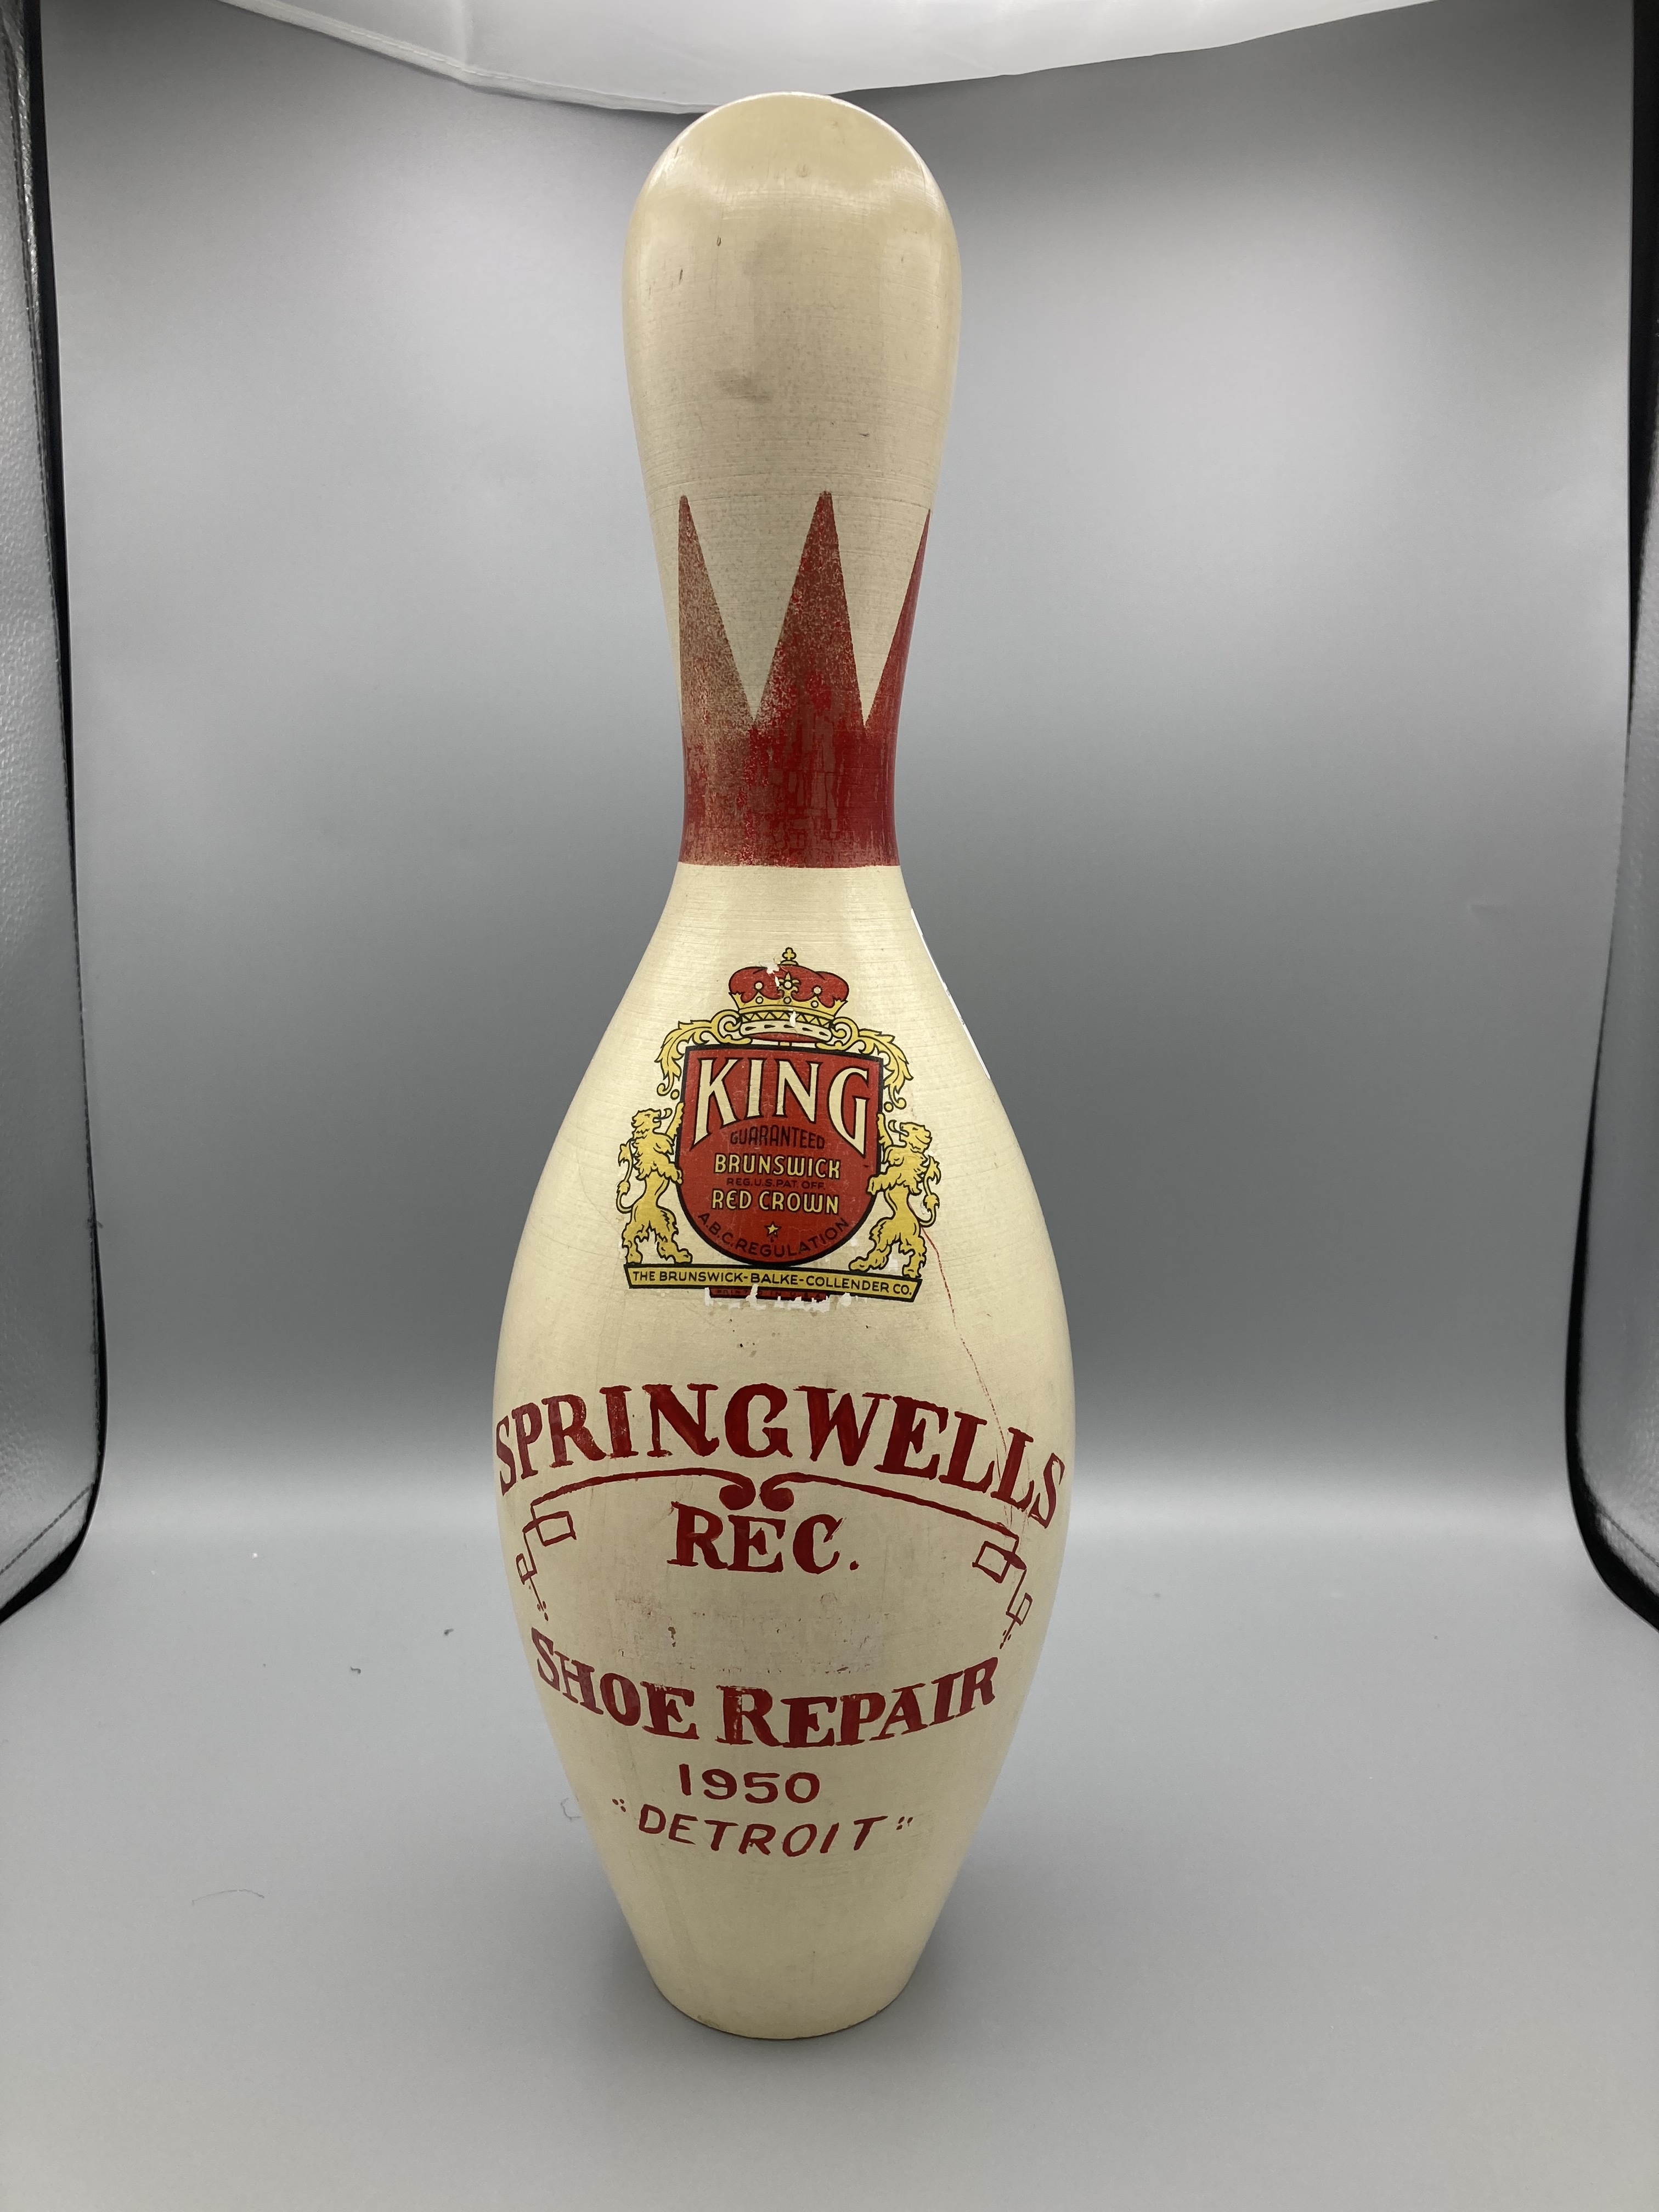 2 NEW full size BRUNSWICK MAX BOWLING PINS Red Crown WIBC ABC plastic coated 